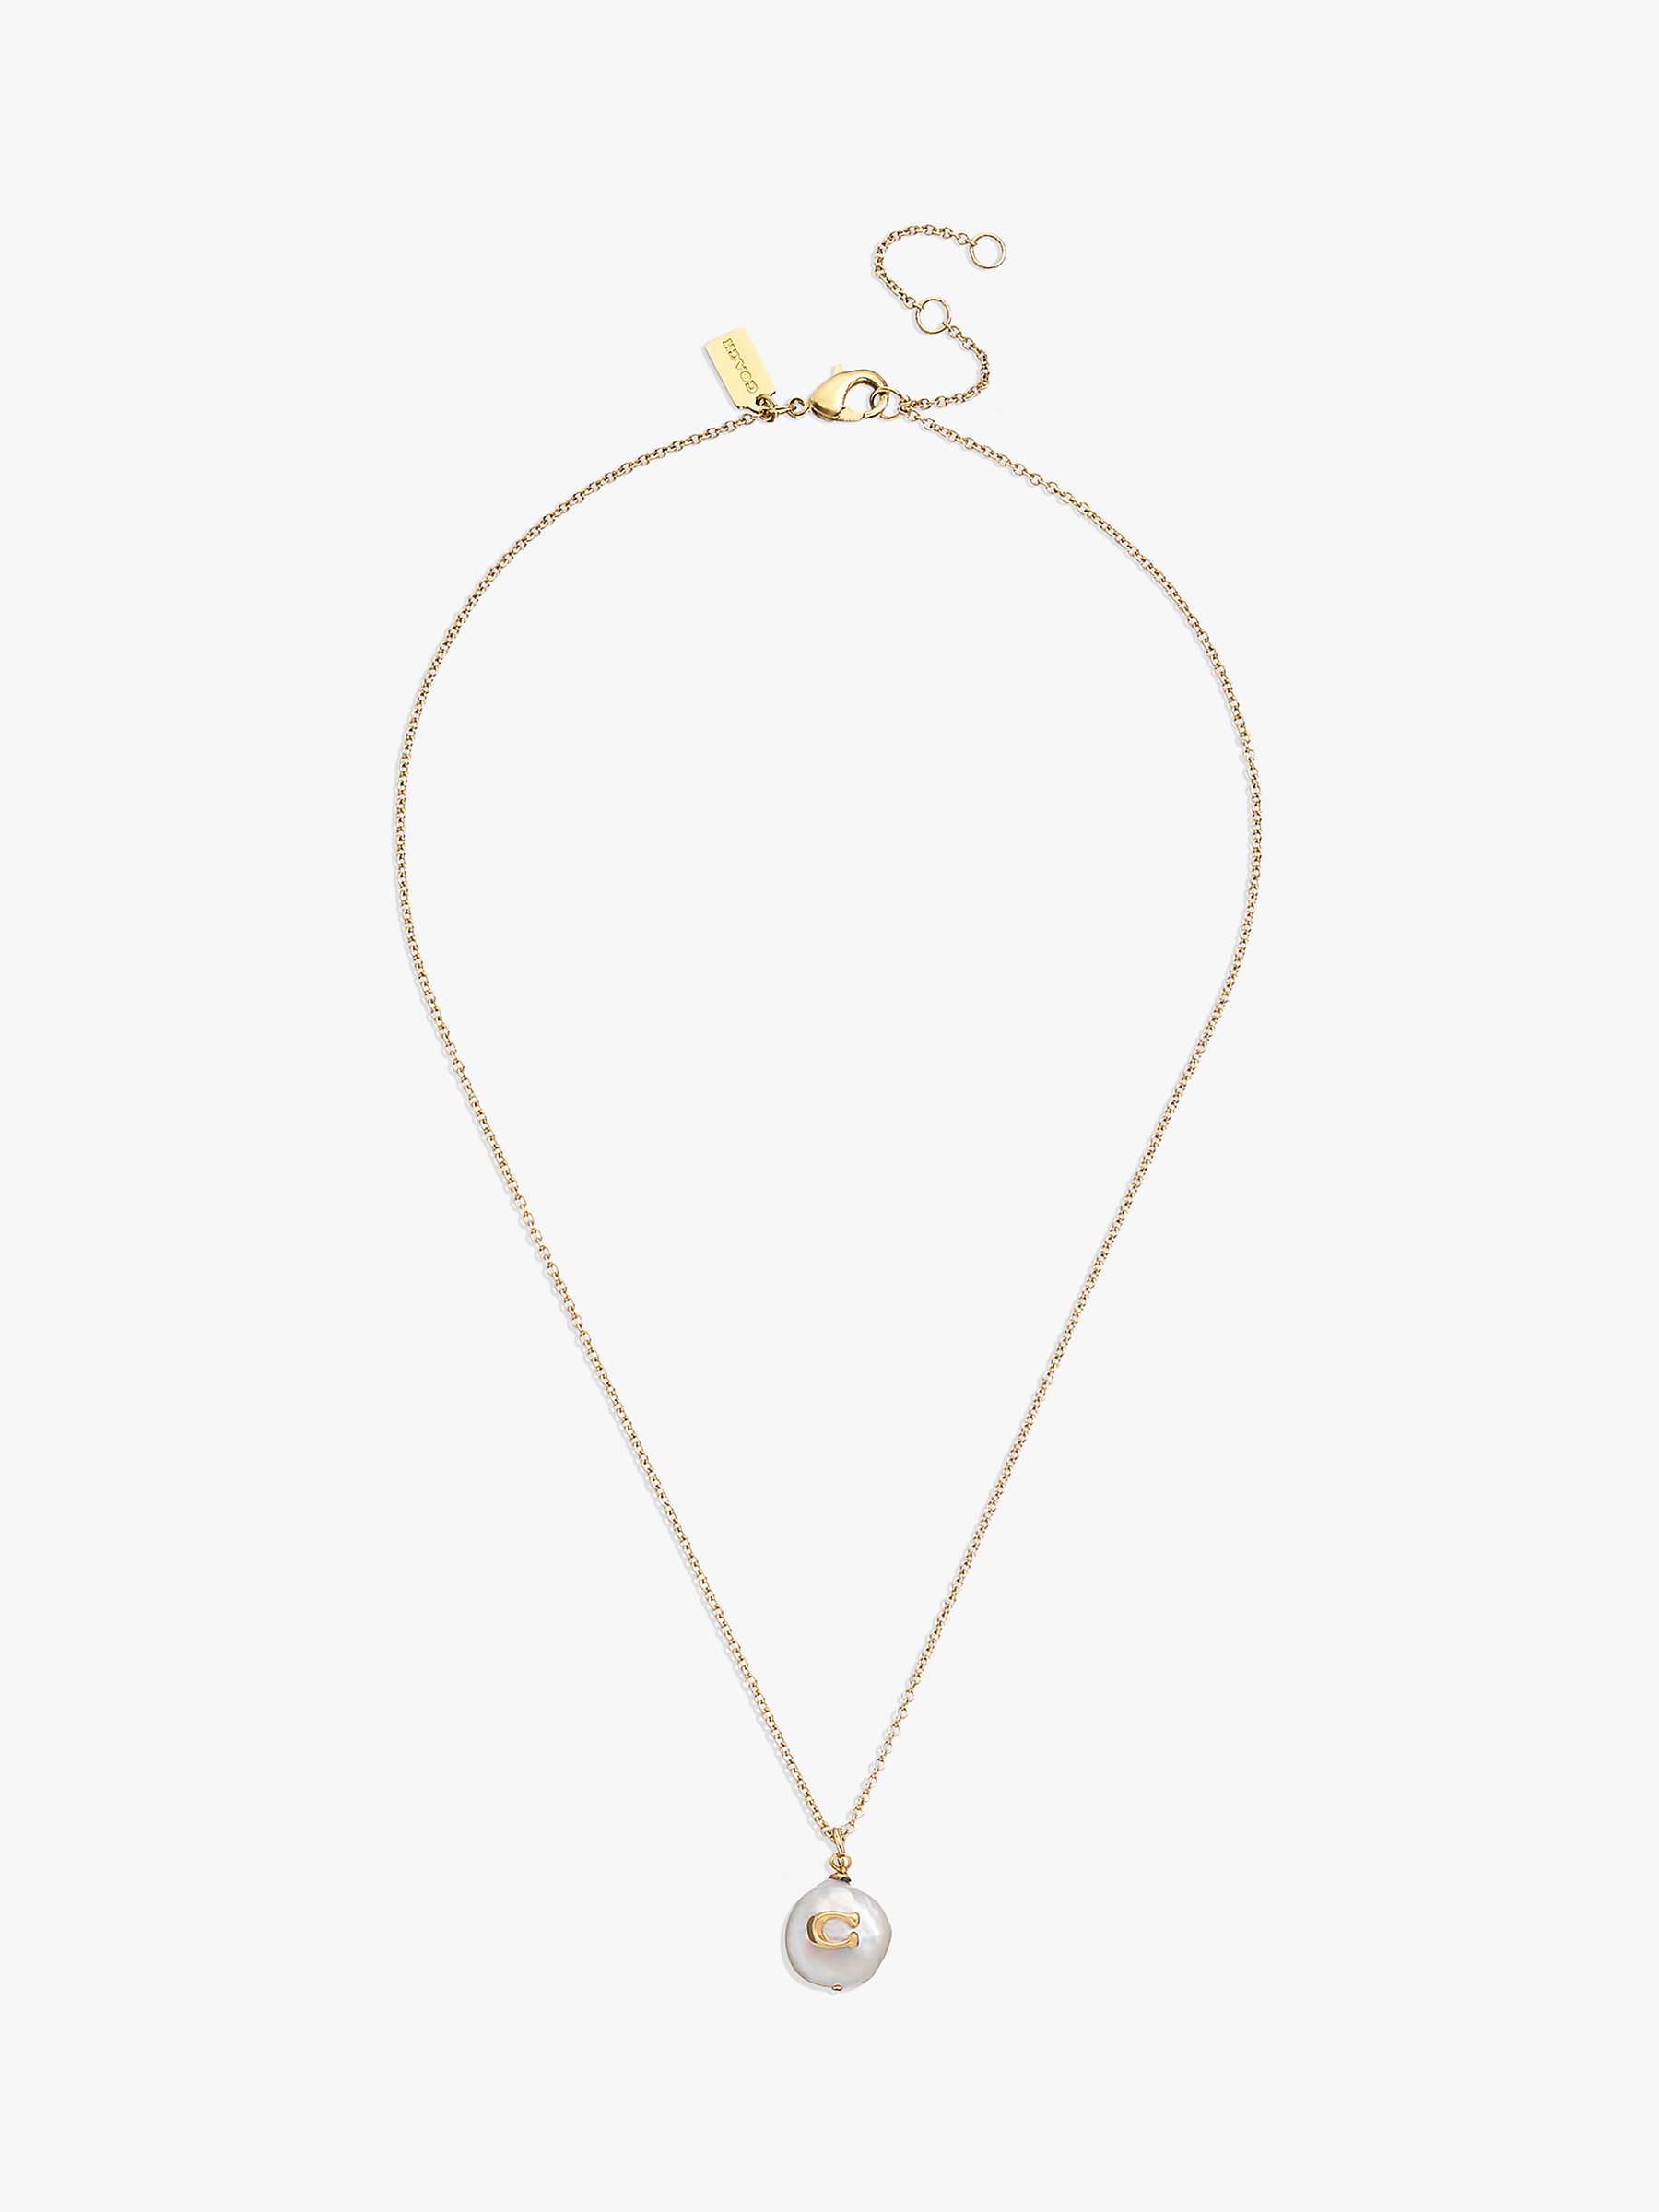 Buy Coach Freshwater Pearl Pendant Necklace, Gold Online at johnlewis.com